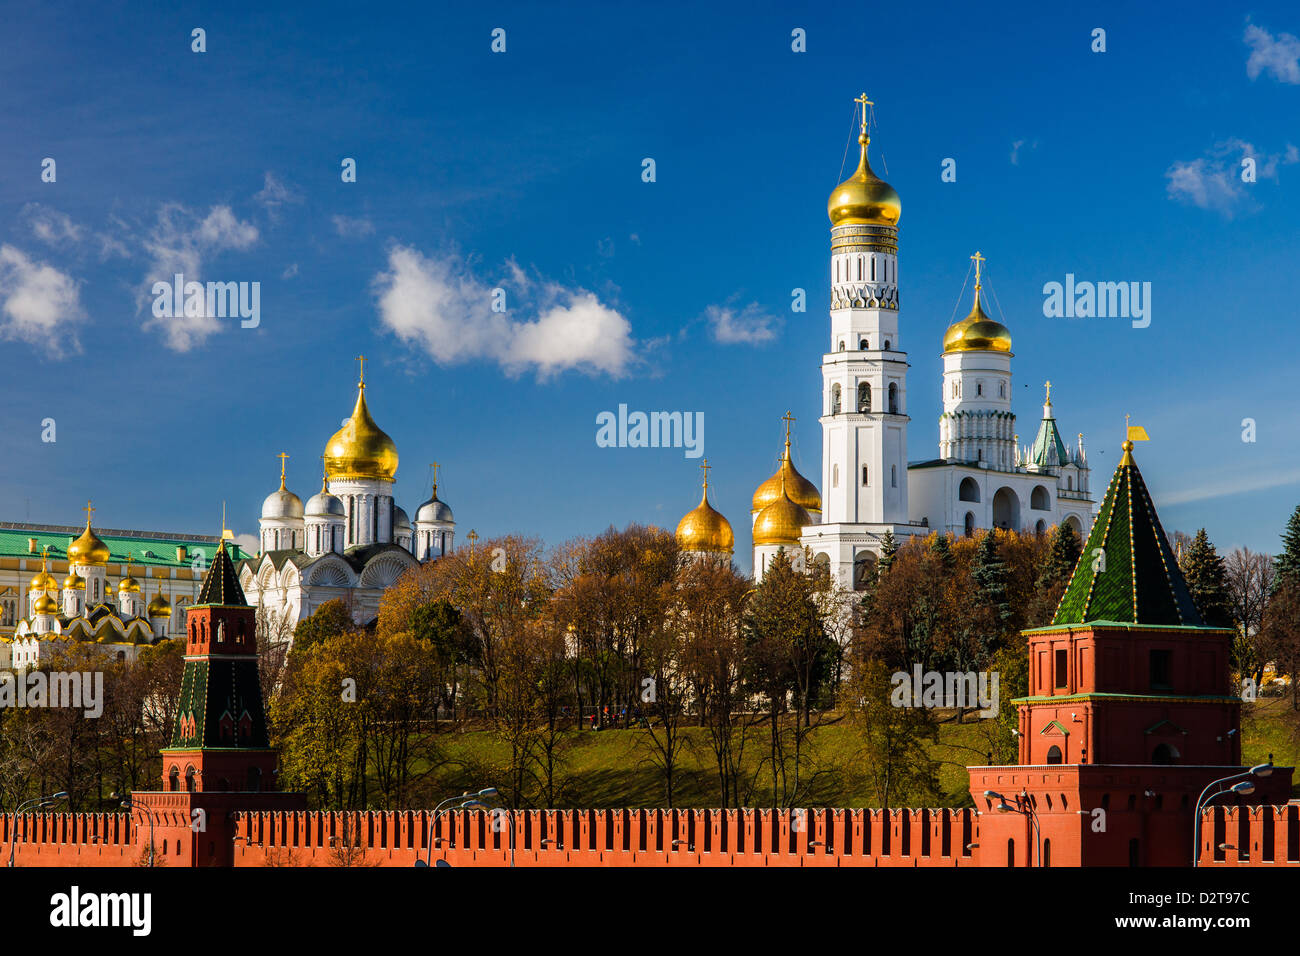 Moscow Kremlin Cathedrals in autumn Stock Photo